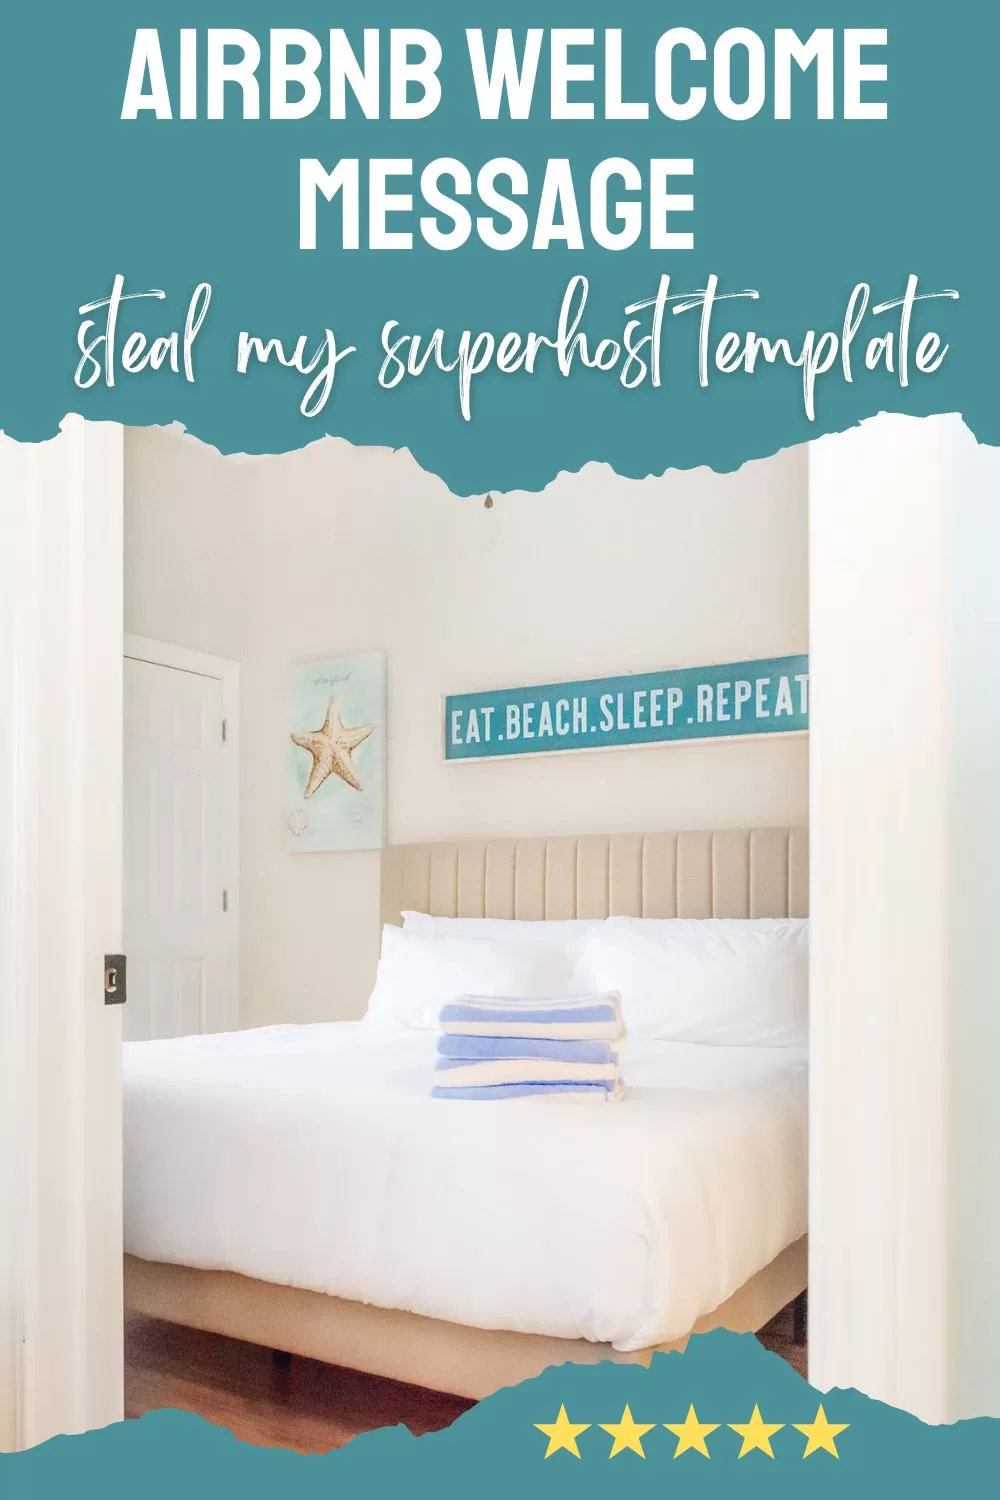 airbnb welcome message example pinterest PIN 